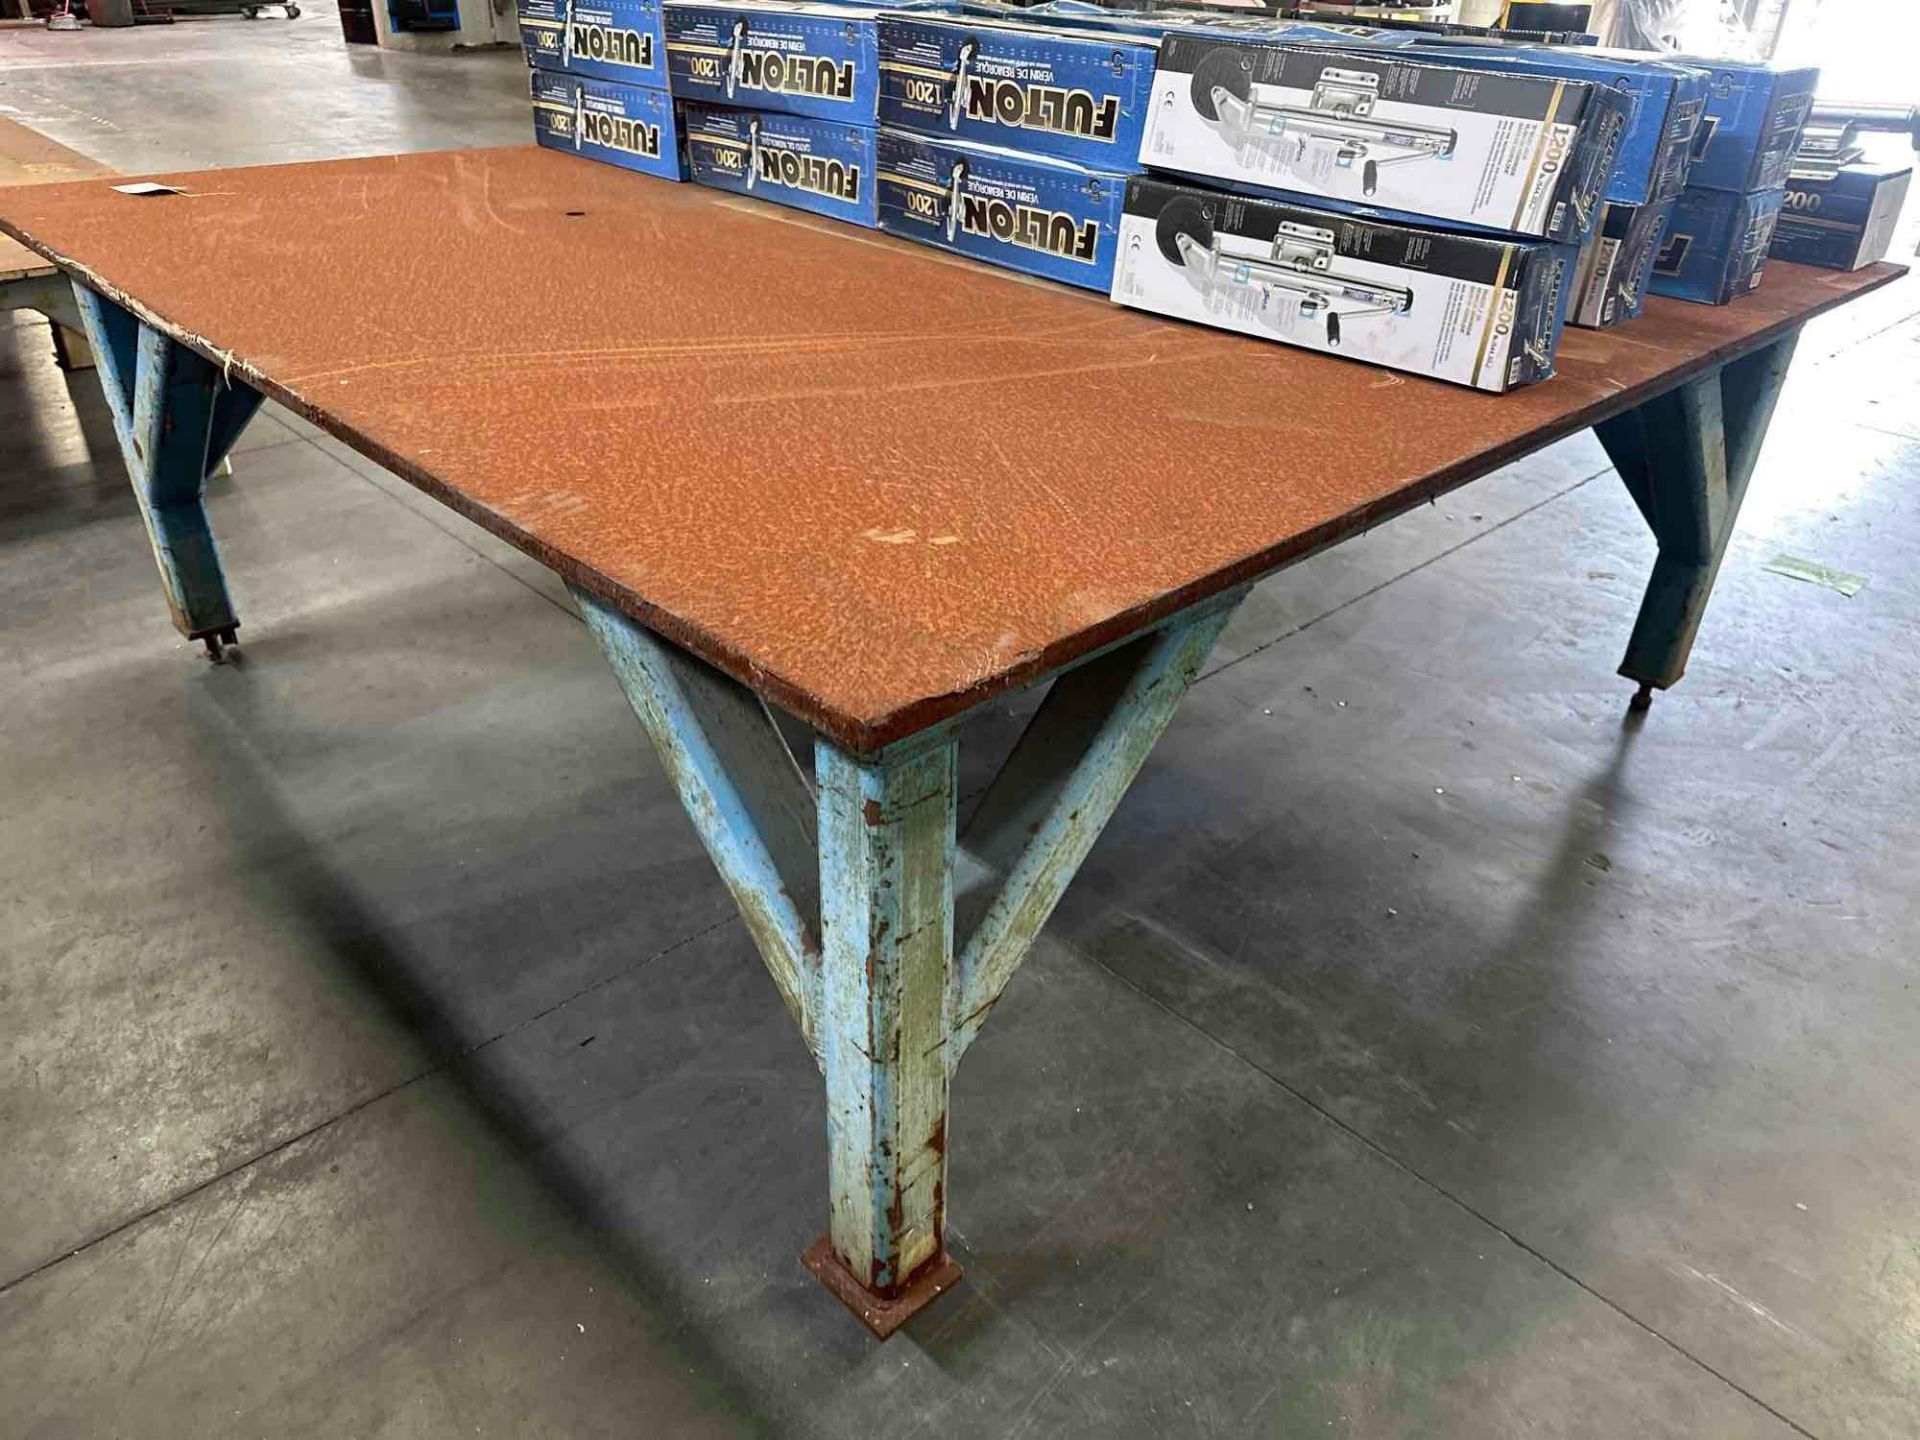 97”L x 96.5”w x 37”H Steel Welding Table *WELDING TABLE ONLY. CONTENTS NOT INCLUDED* - Image 4 of 4